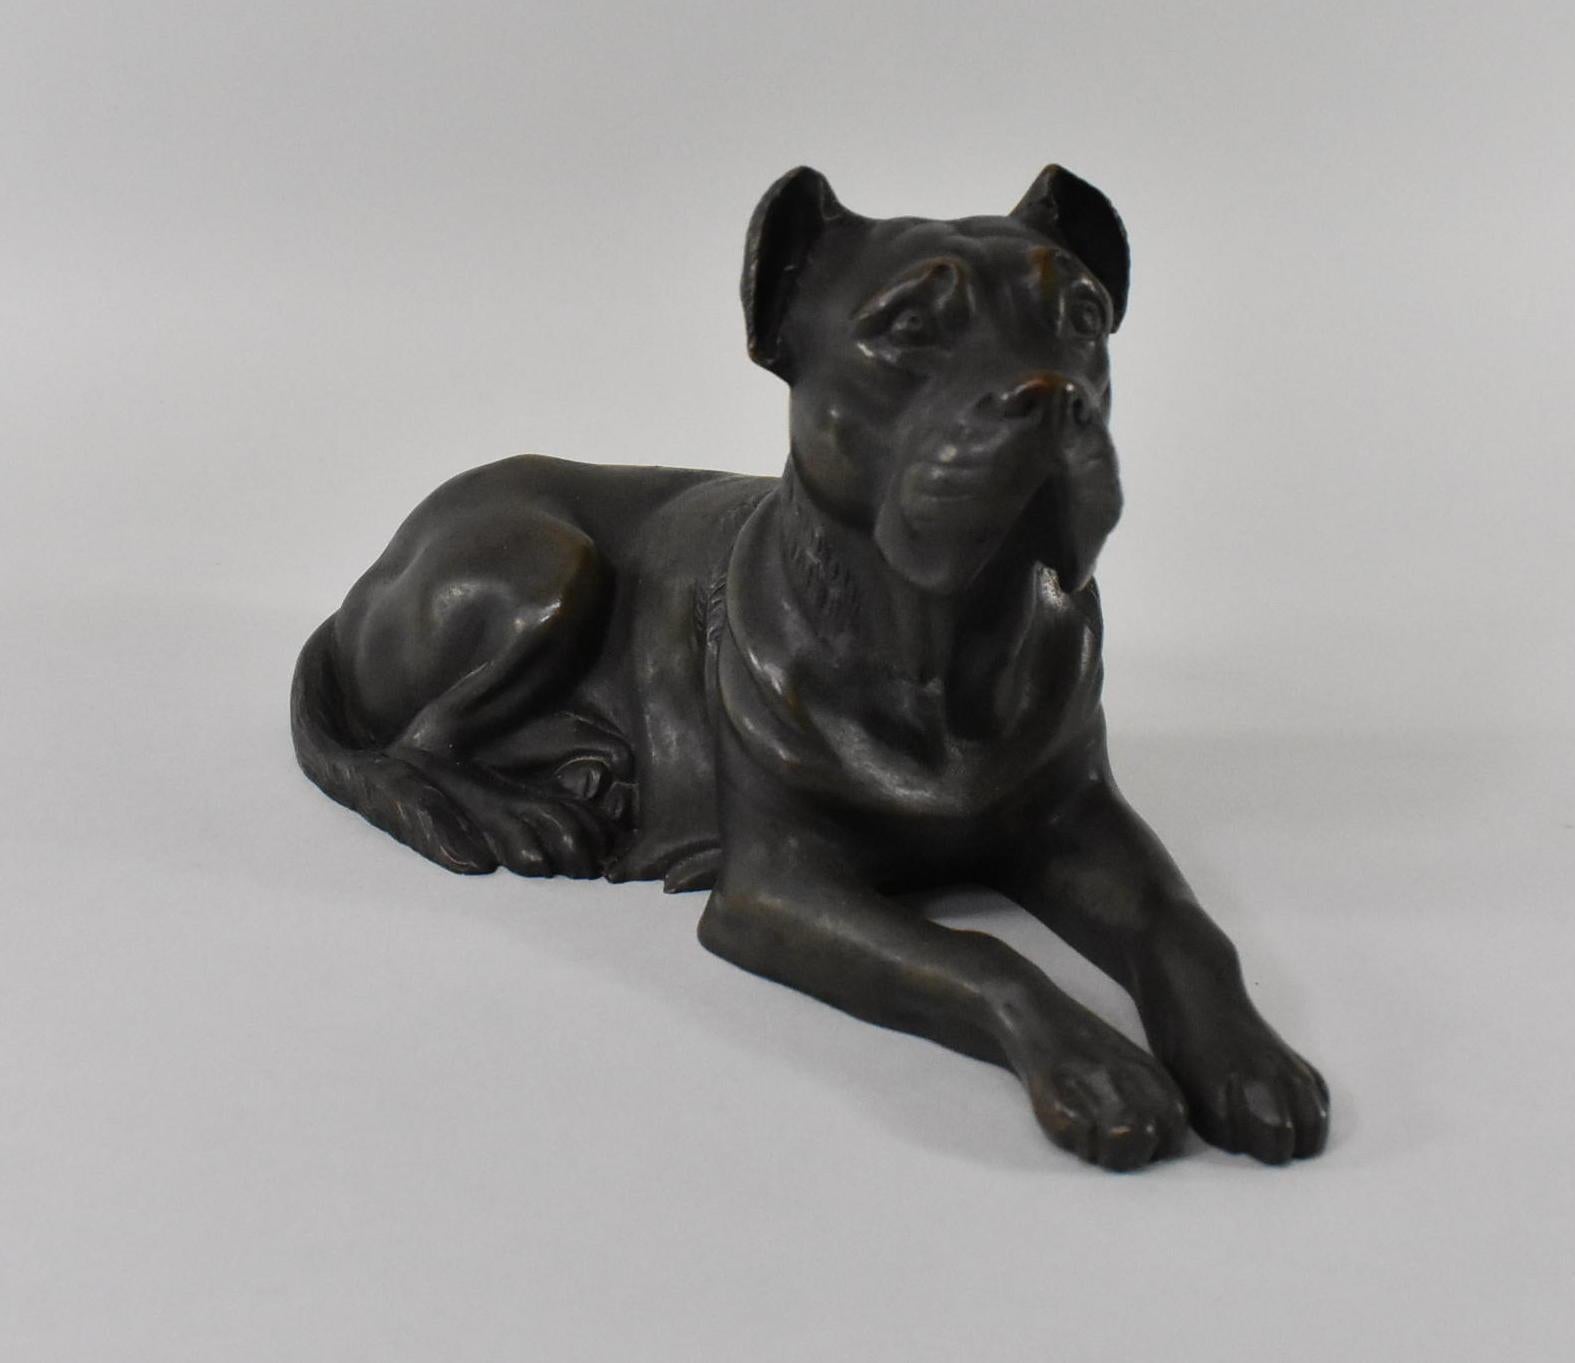 Turn of the century heavy cast bronze statue laying Mastiff dog. Realistic fur details around the shoulders. Beautiful patina. Very nice condition. Dimensions: 9